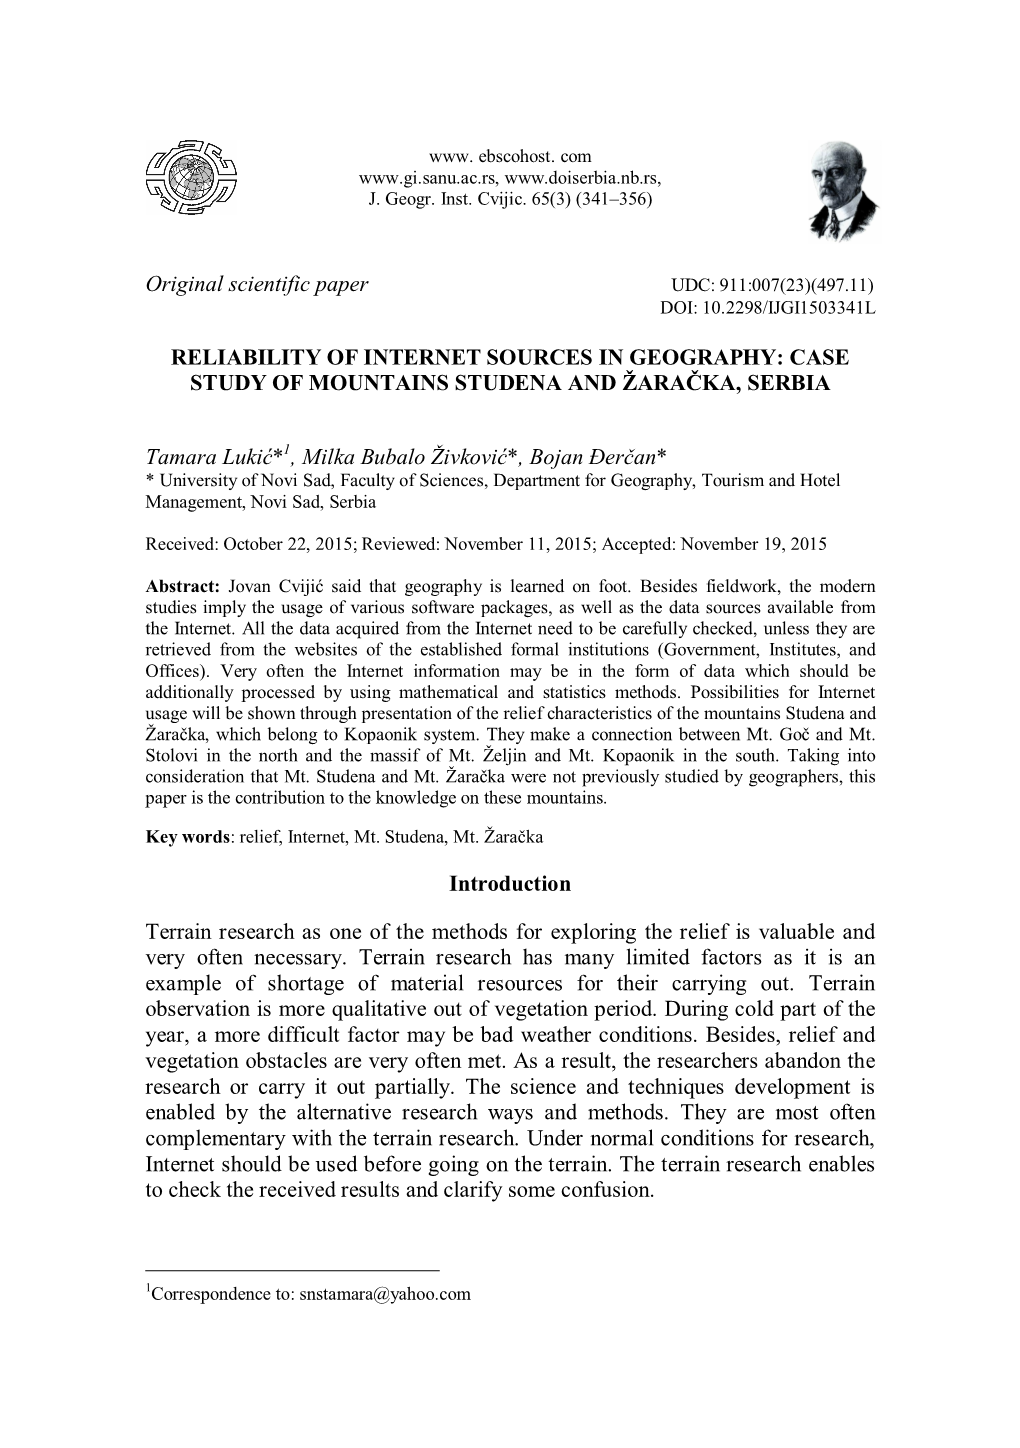 Reliability of Internet Sources in Geography: Case Study of Mountains Studena and Žaračka, Serbia